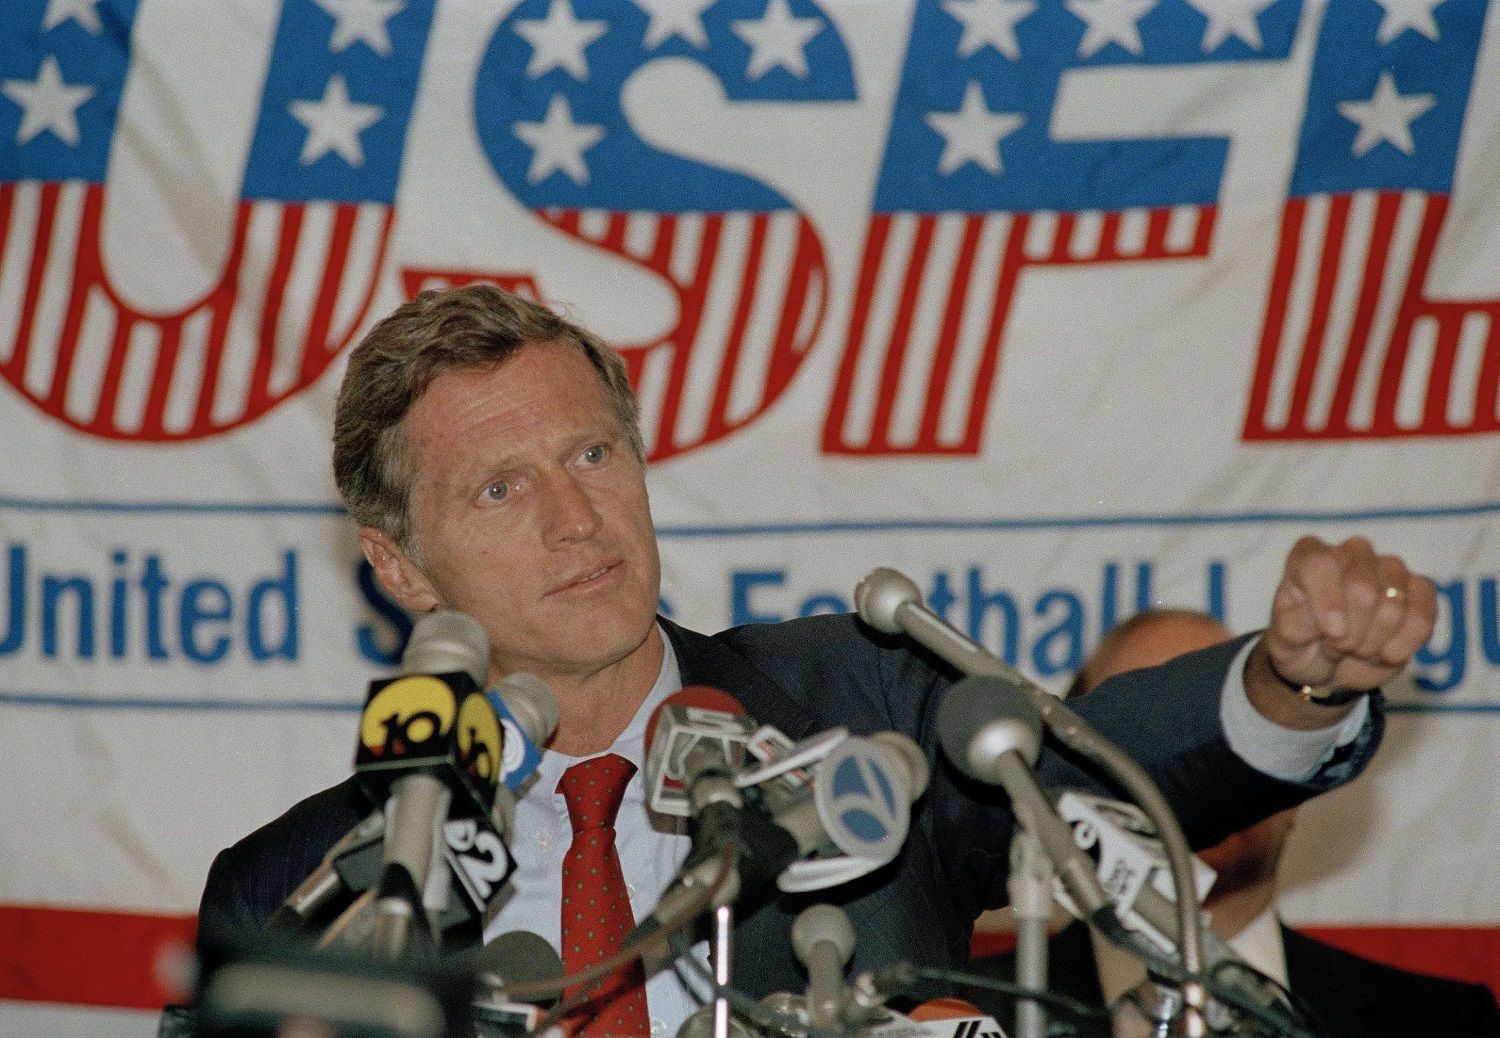 United States Football League commissioner Harry Usher gestures during a news conference in New York, Aug. 4, 1986. the USFL club owners voted to suspend play until 1987, less than a week after they were awarded only $3 in damages in a $1.69 billion anti-trust suit against the National Football League. The eight-team league, which operated for three years with a spring-summer schedule, was to have opened its first fall schedule on Sept. 13. (AP Photo/Susan Ragan)